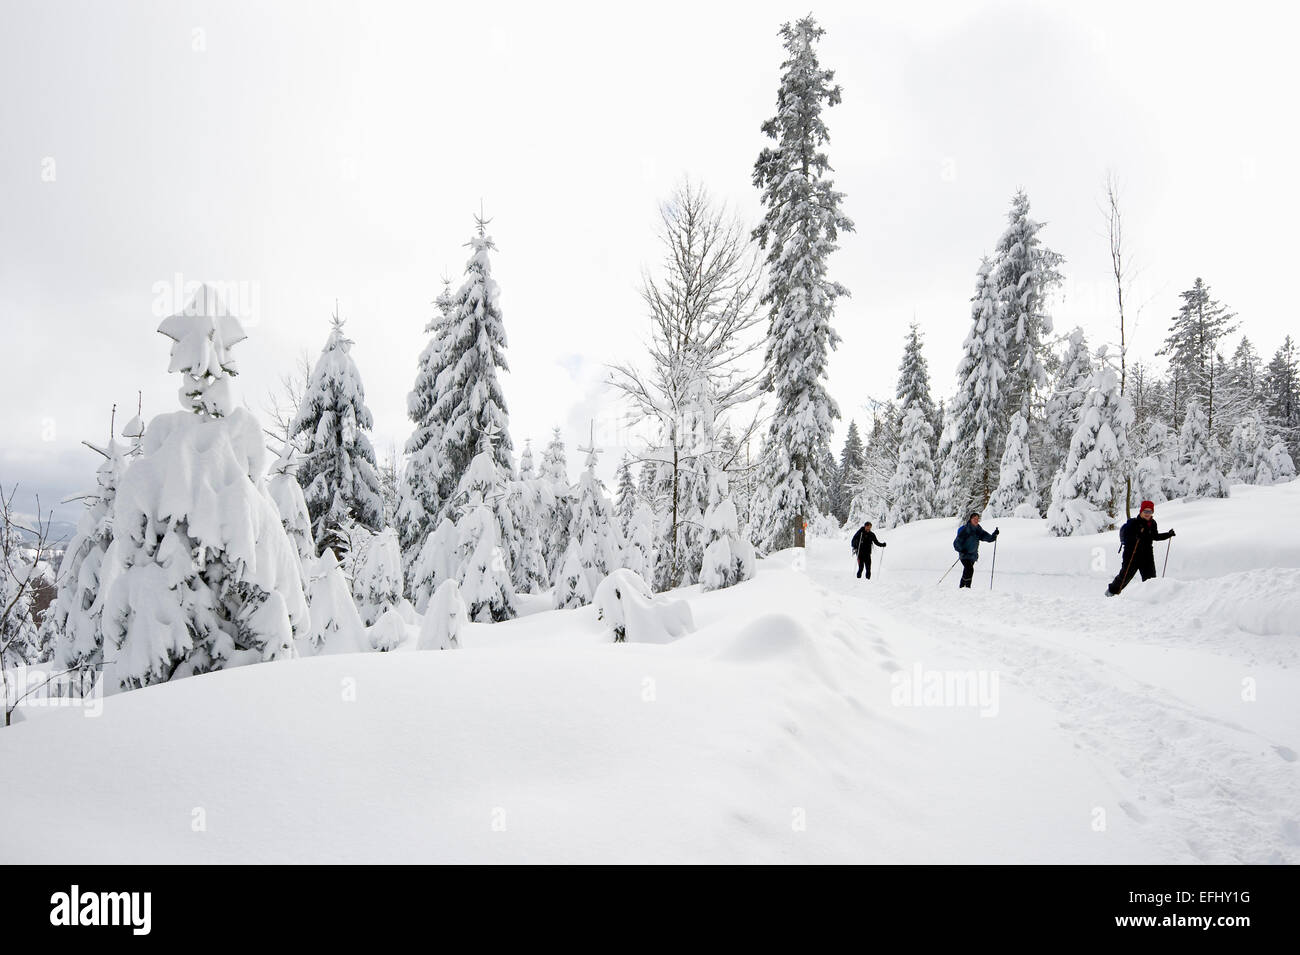 Snow covered trees and cross-country skiers, Schauinsland, near Freiburg im Breisgau, Black Forest, Baden-Wuerttemberg, Germany Stock Photo